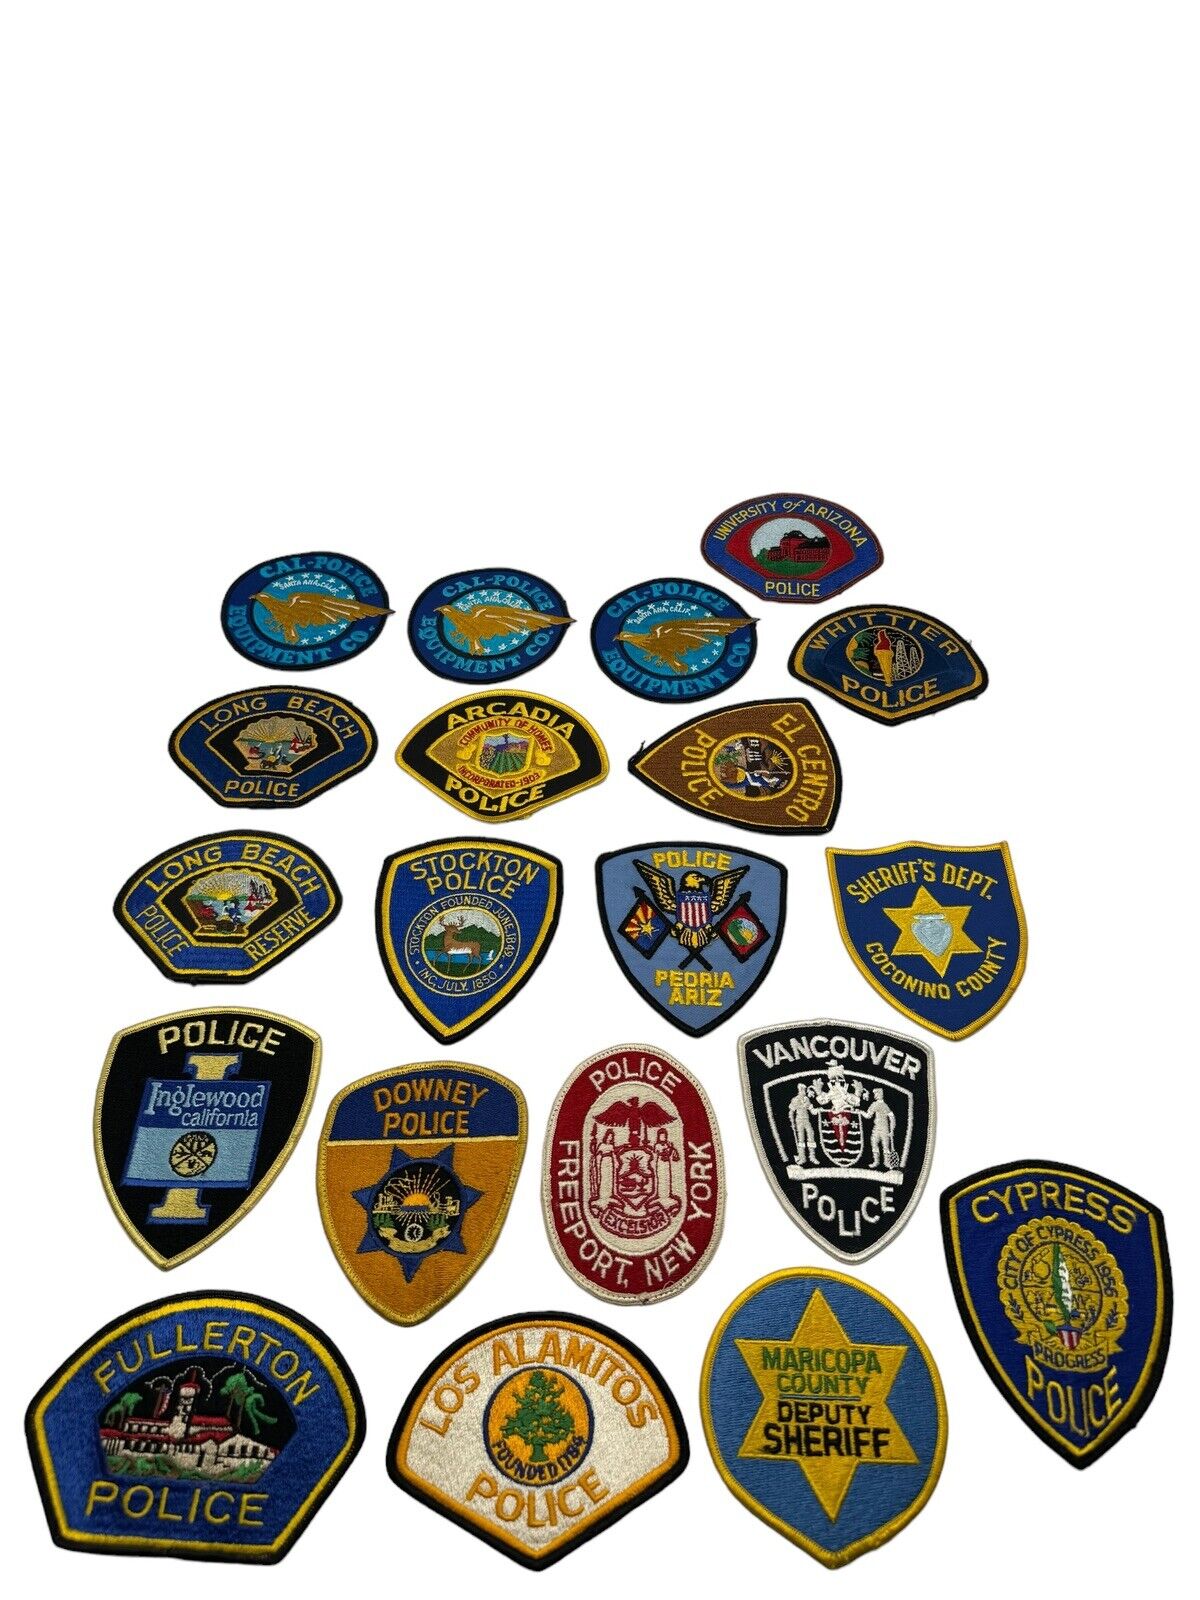 Police Patches Mixed Bundle Lot of 20